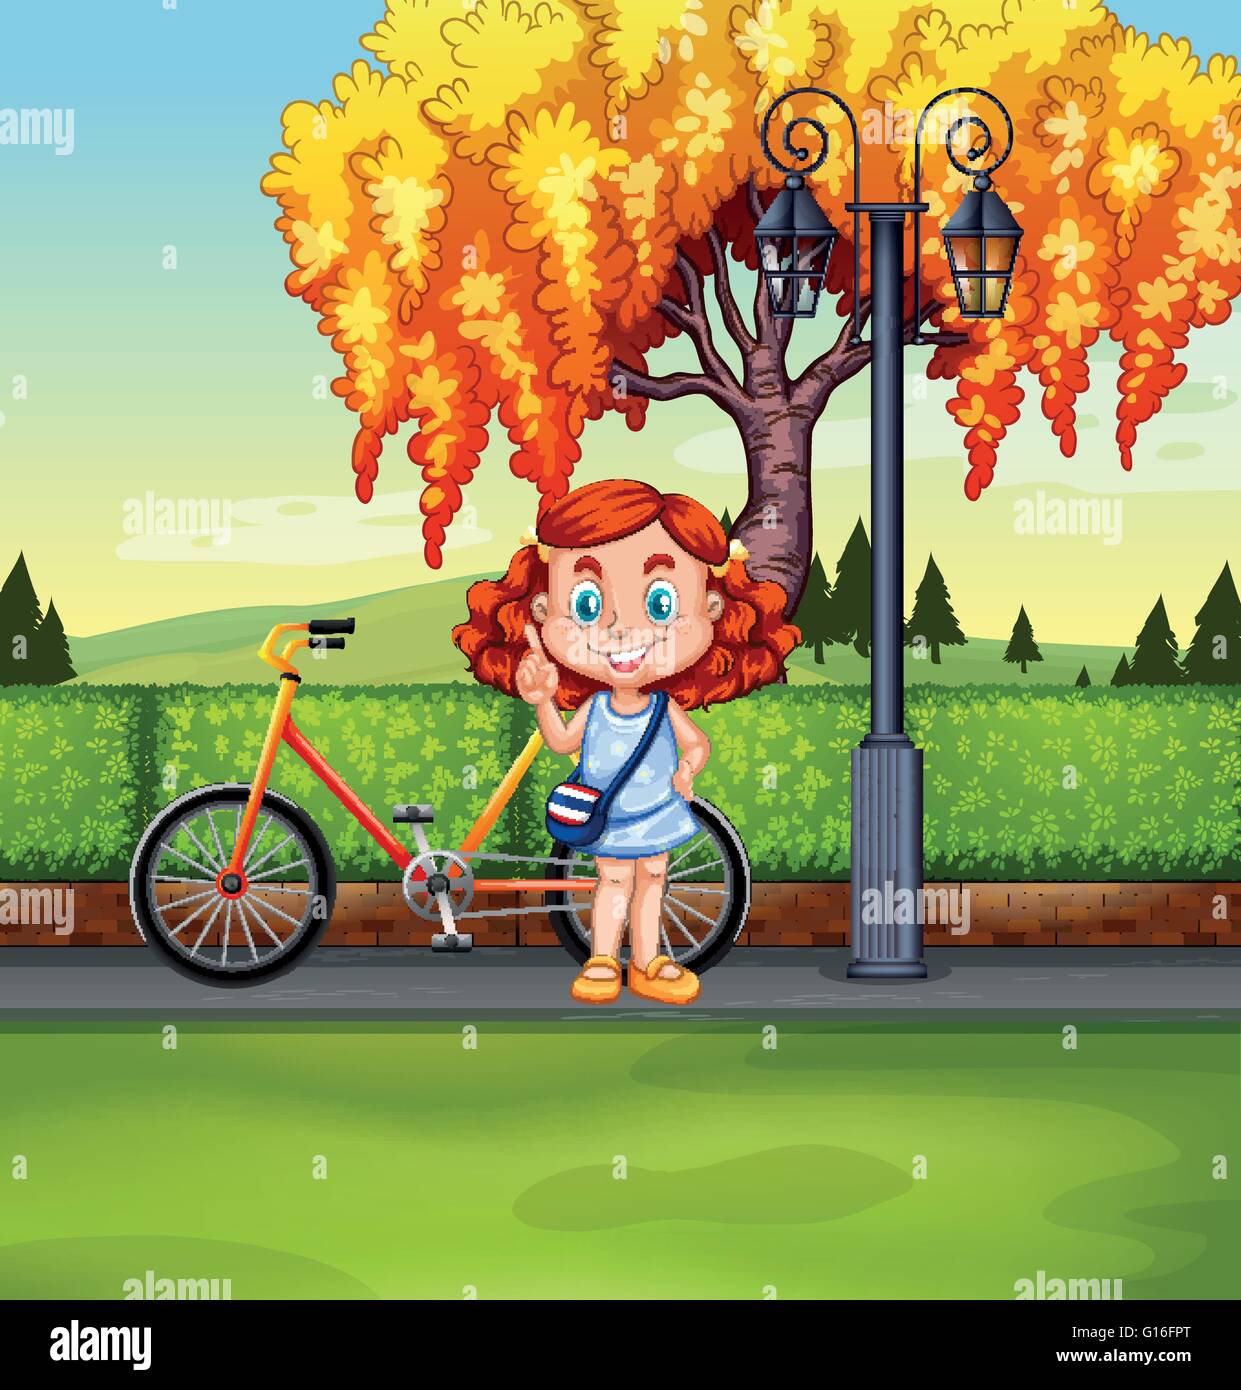 Little girl and bicycle in the park illustration Stock Vector